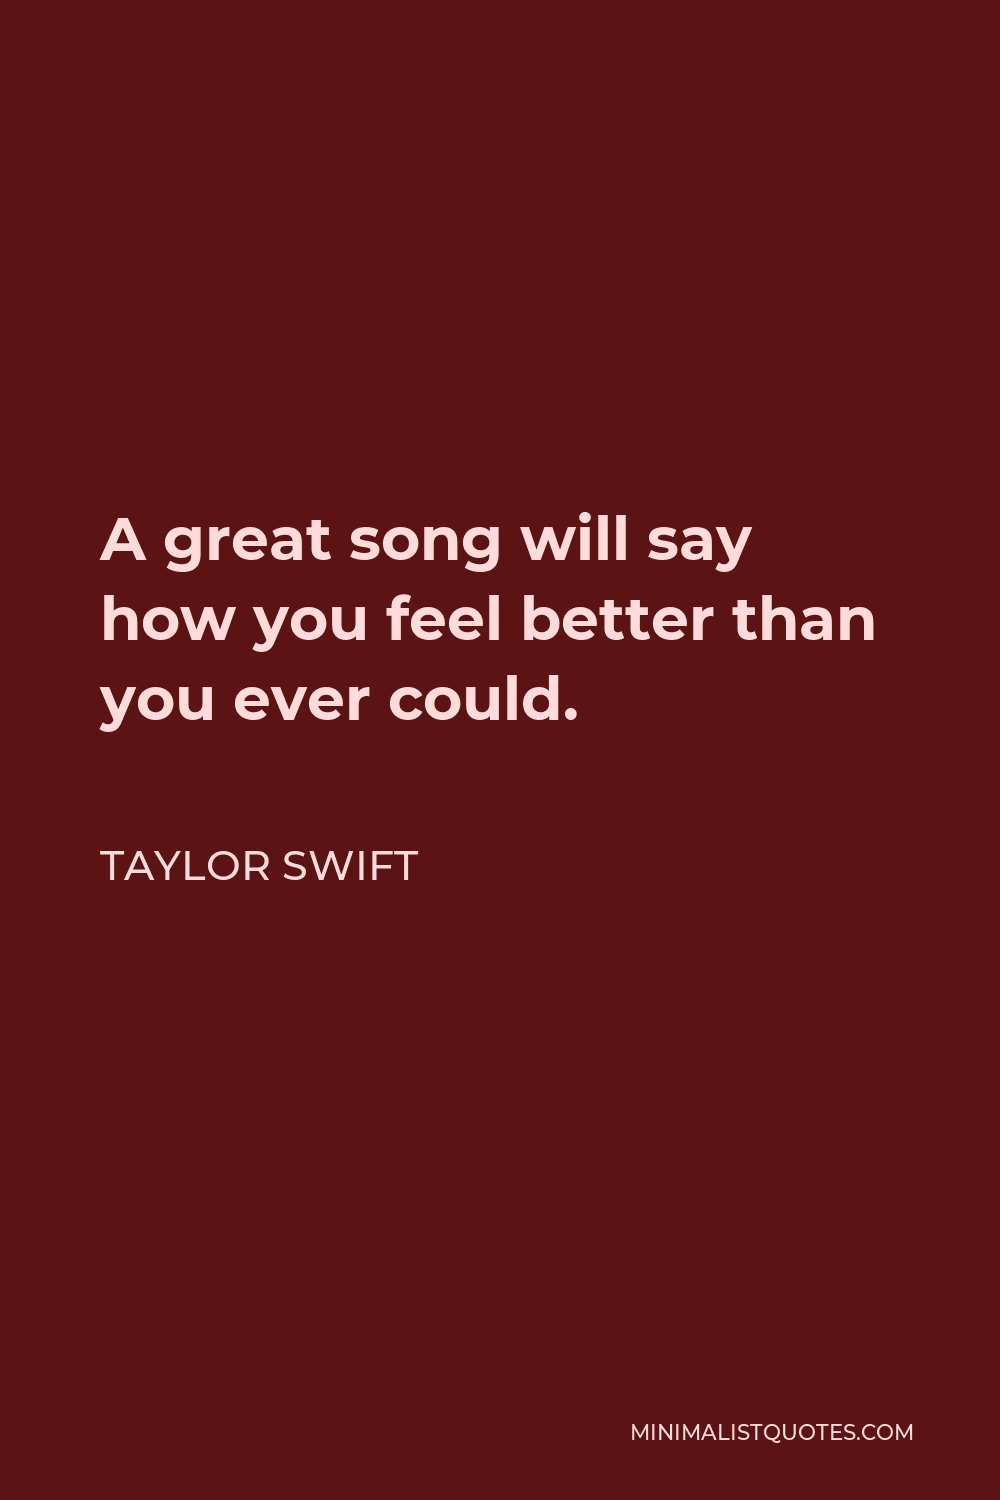 taylor swift quotes from songs red